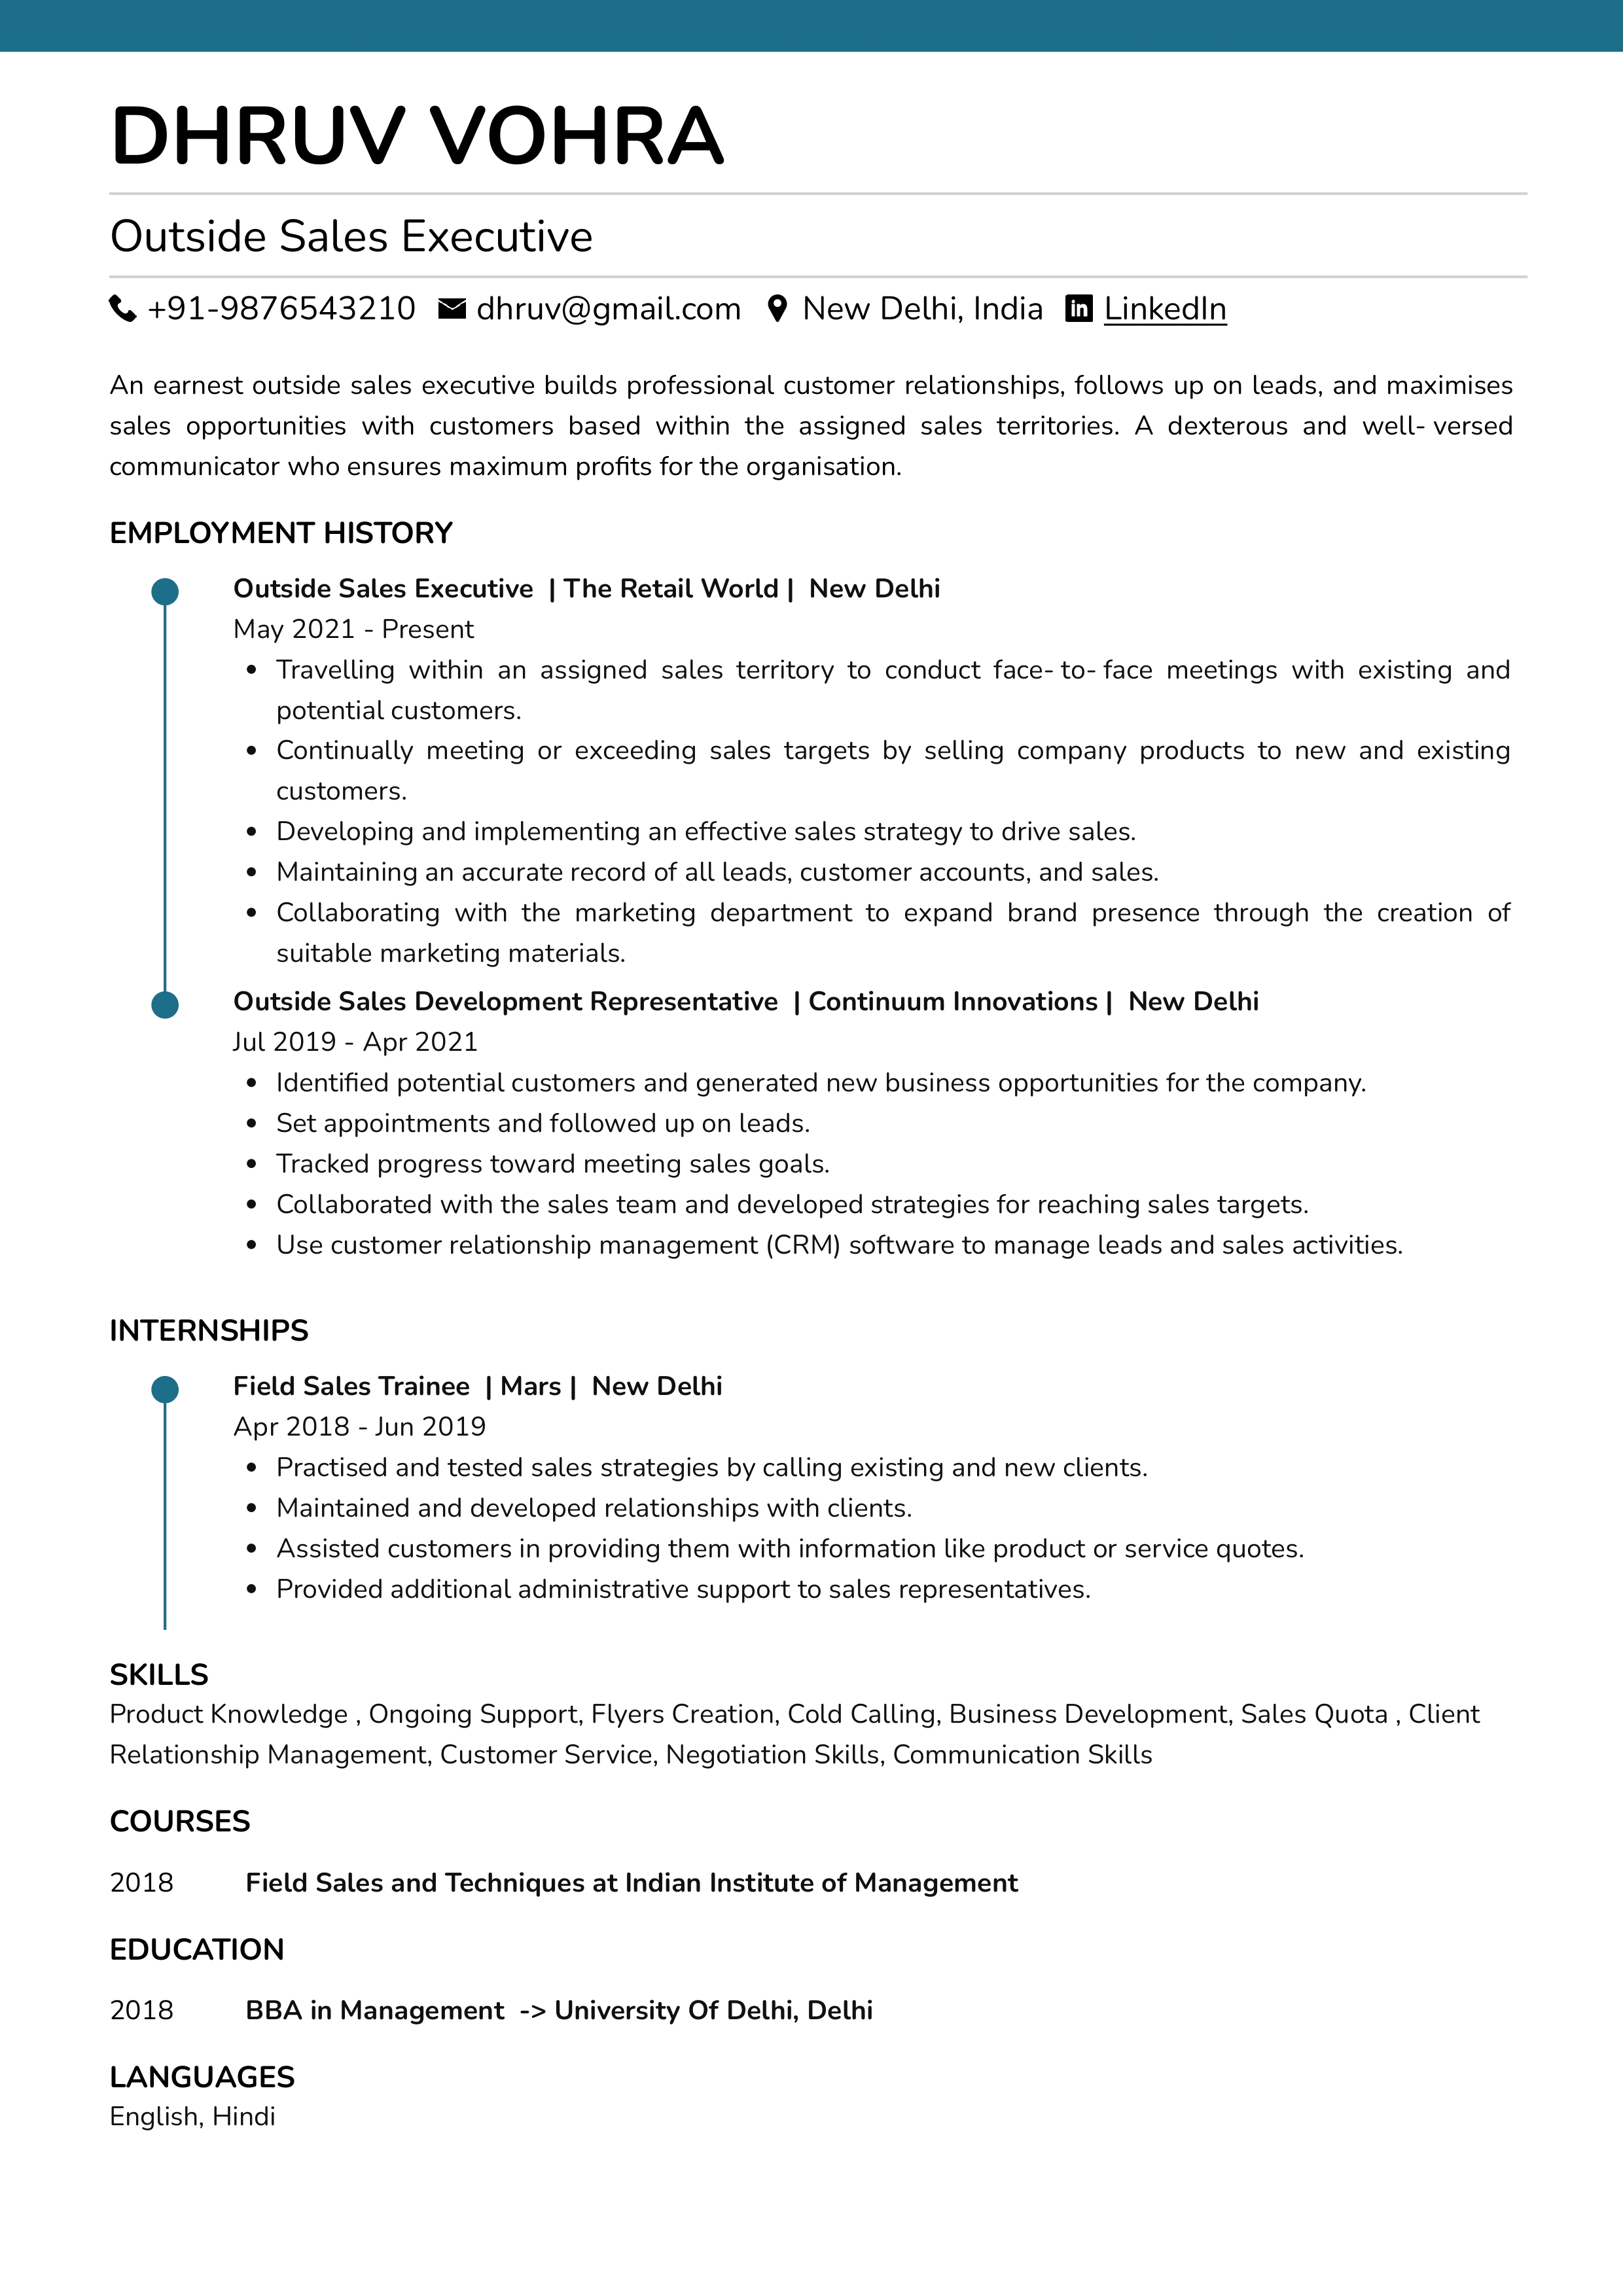 Resume of Outside Sales Executive built on Resumod